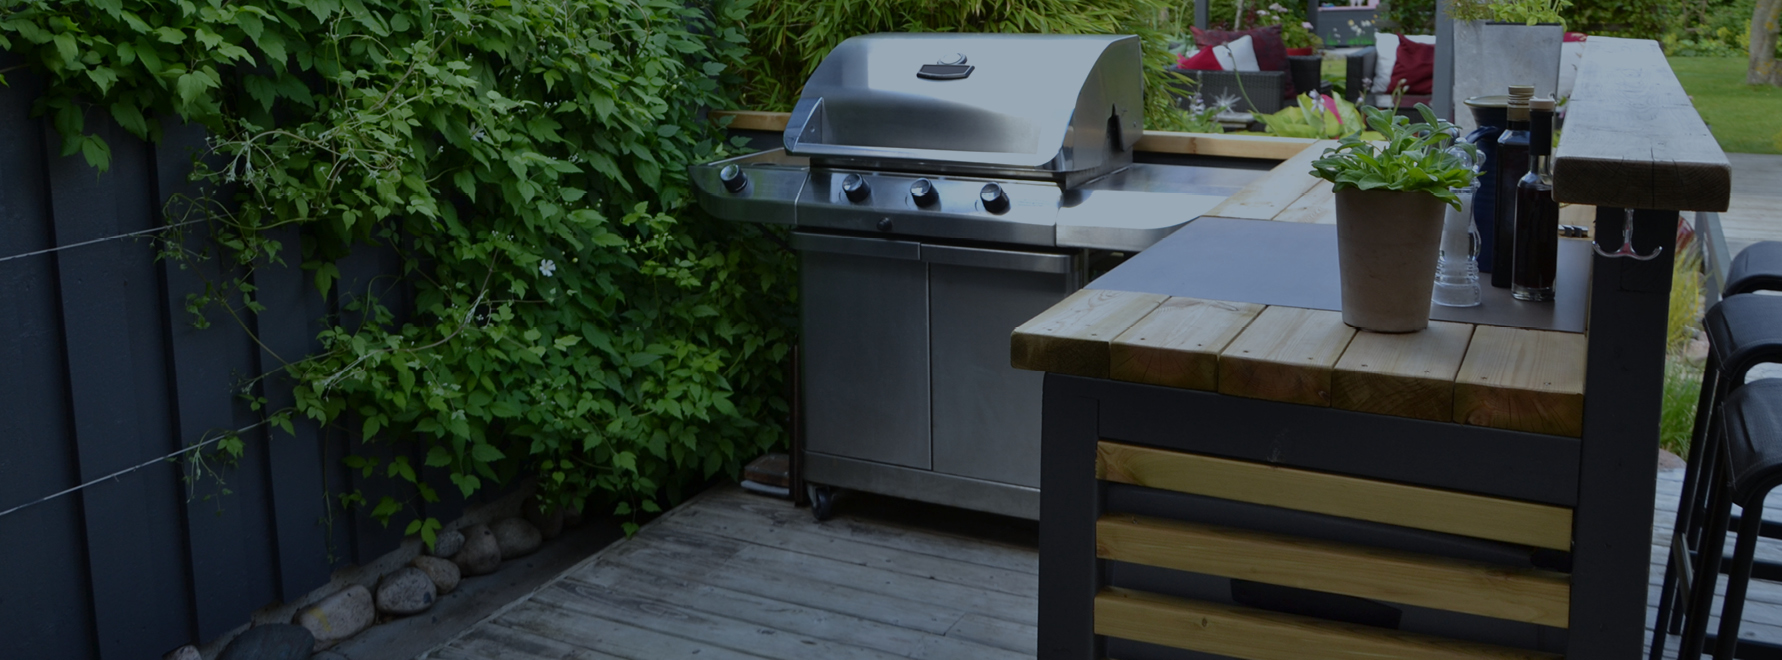 Best Backyard Barbecue Outdoor Living Call Out